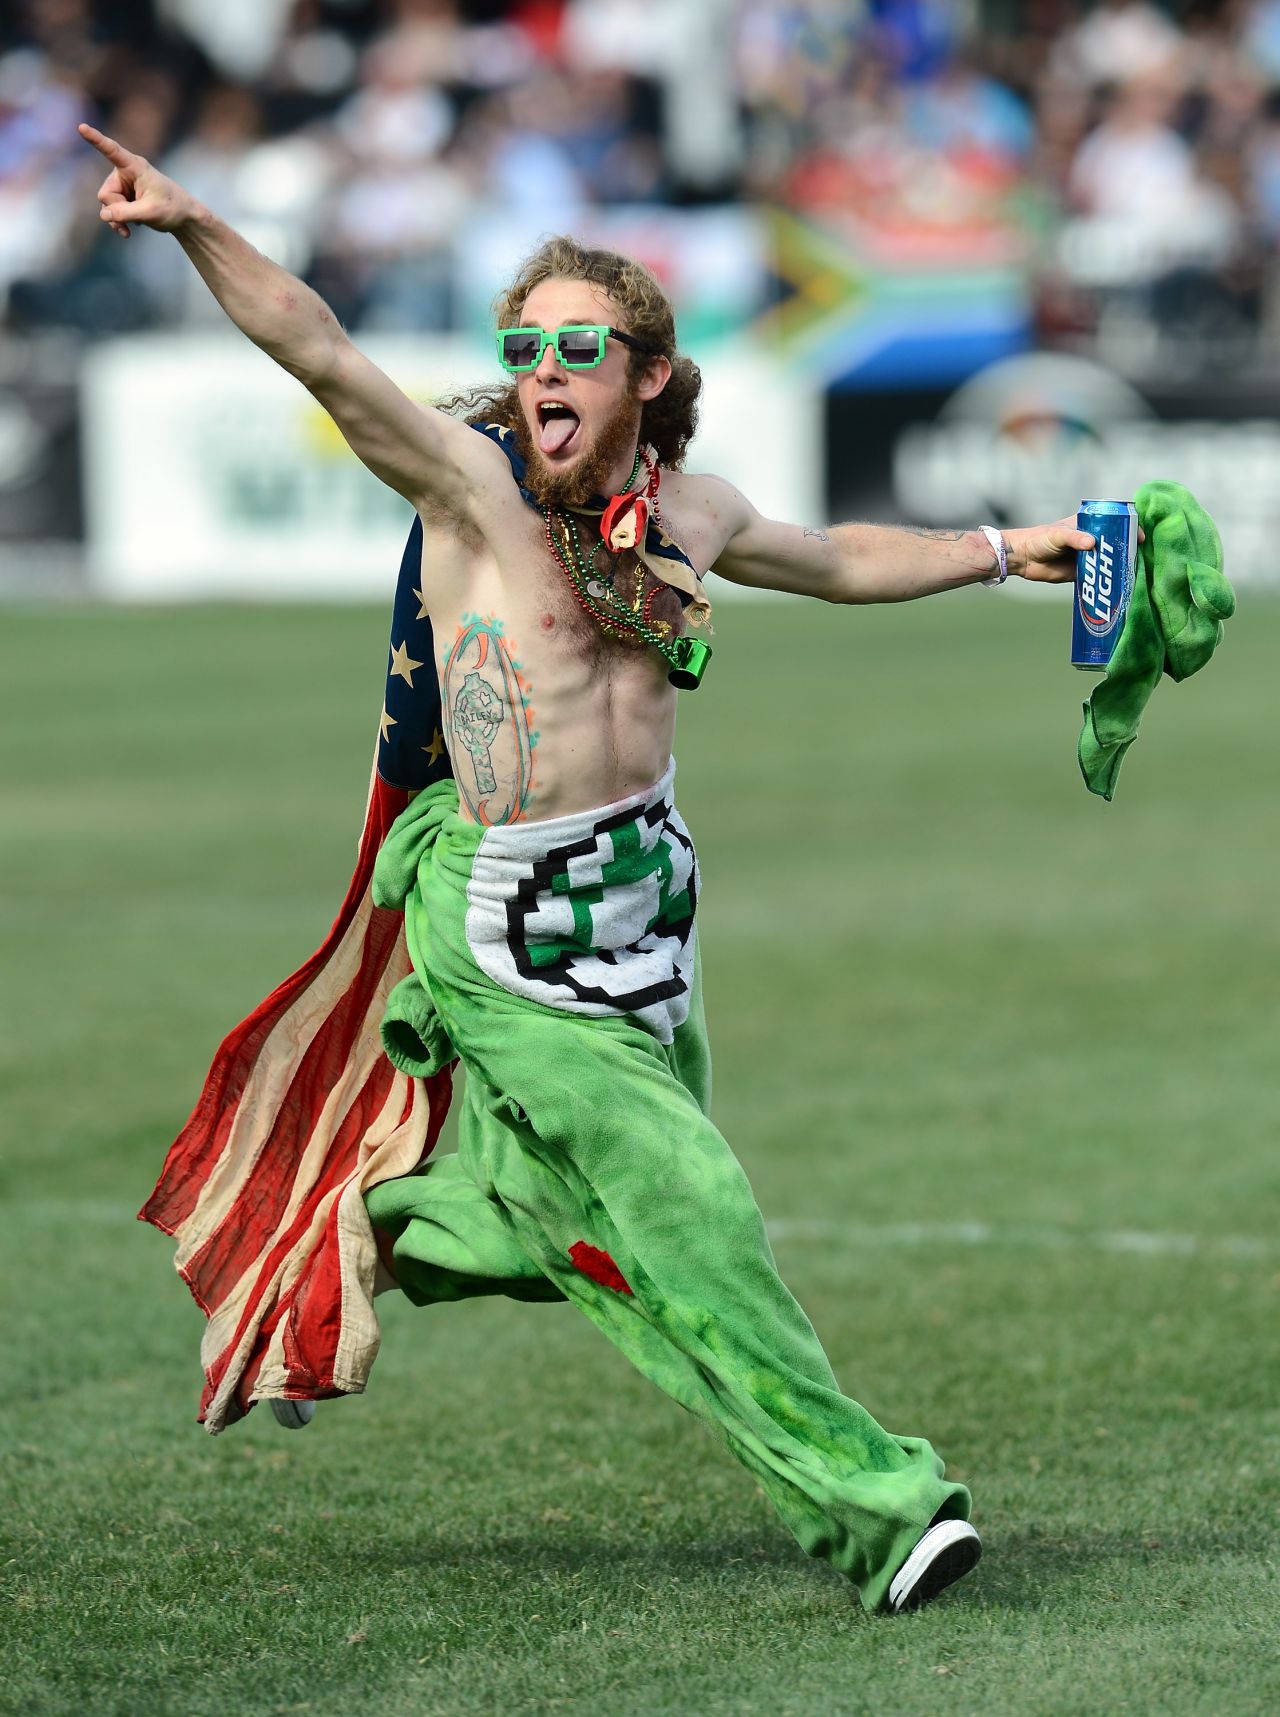 This fan also took center stage during a 2014 match between the US and Spain. 